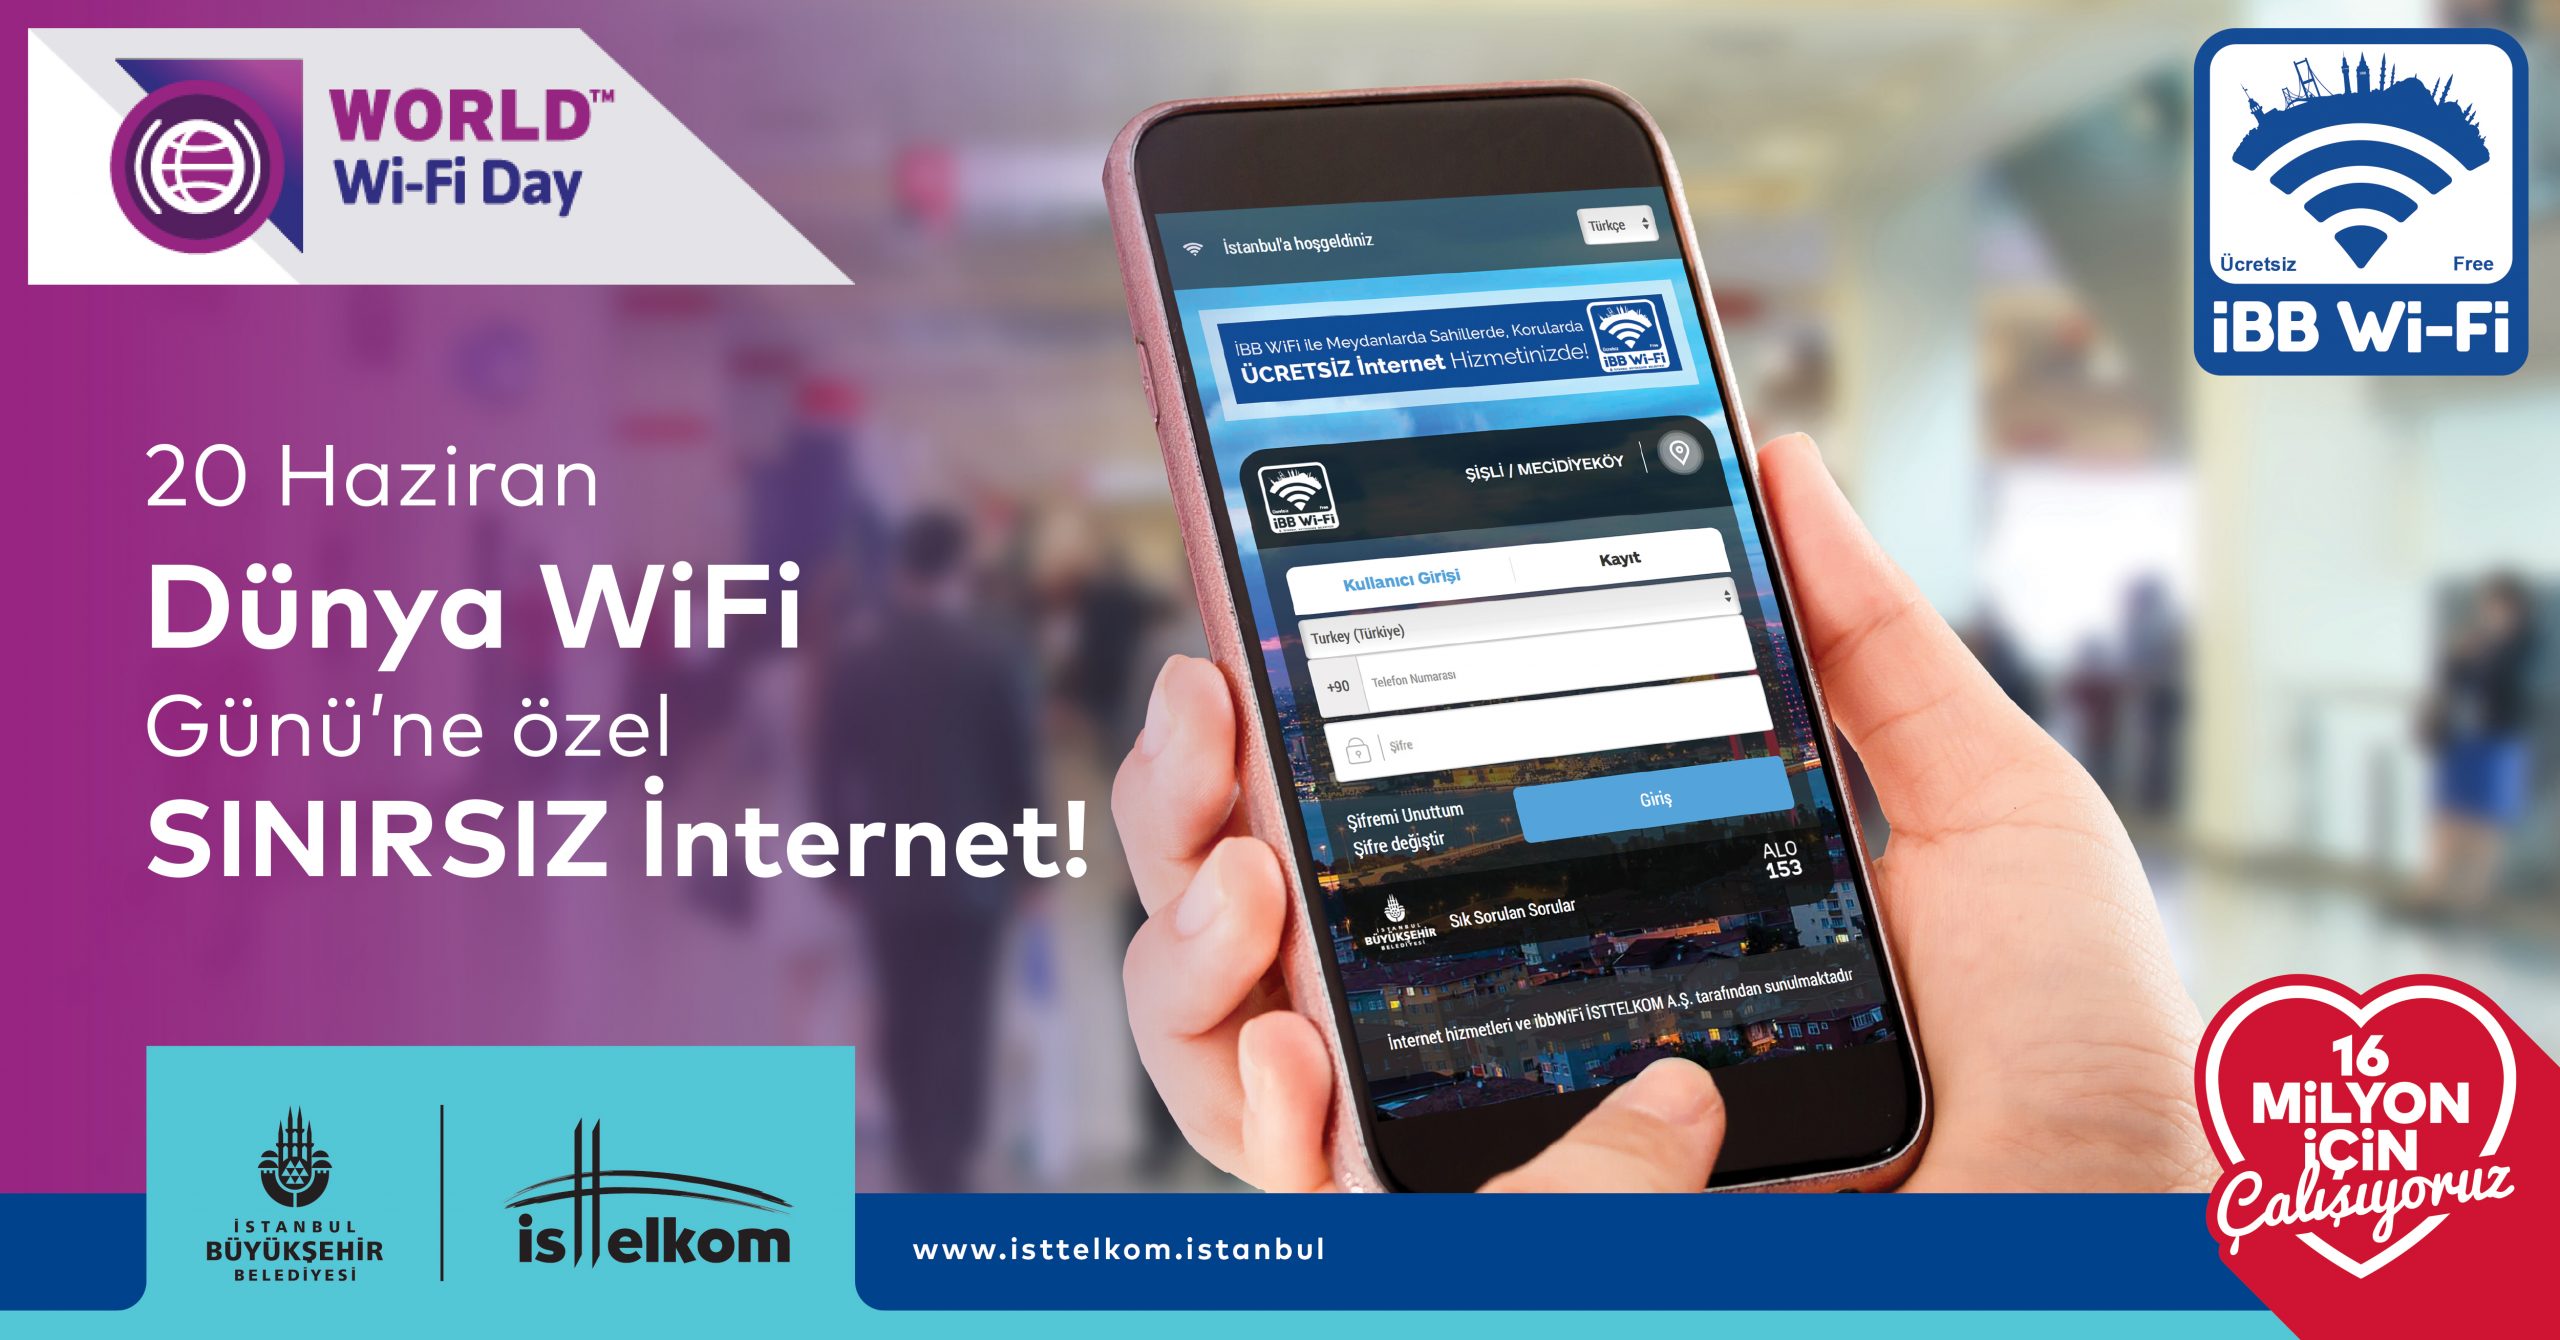 IBB WIFI WILL BE UNLIMITED AND FREE OF CHARGE ON THE SPECIAL OCCASION OF “WORLD WIFI DAY”